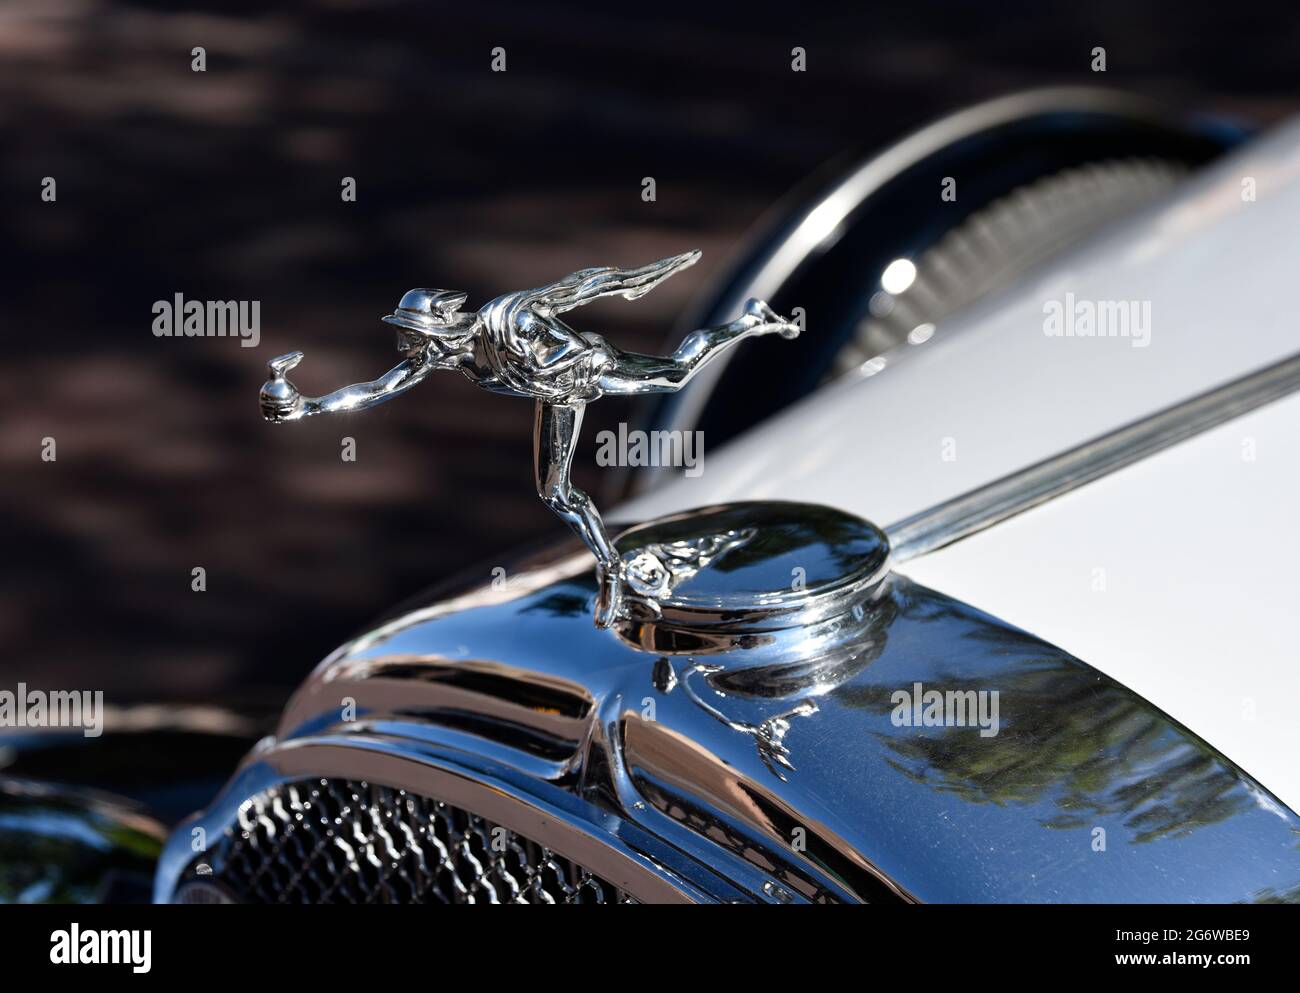 A Mercury Man of Fire hood ornament on the front of a 1932 Buick sedan on display at a Fourth of July car show in Santa Fe, New Mexico. Stock Photo